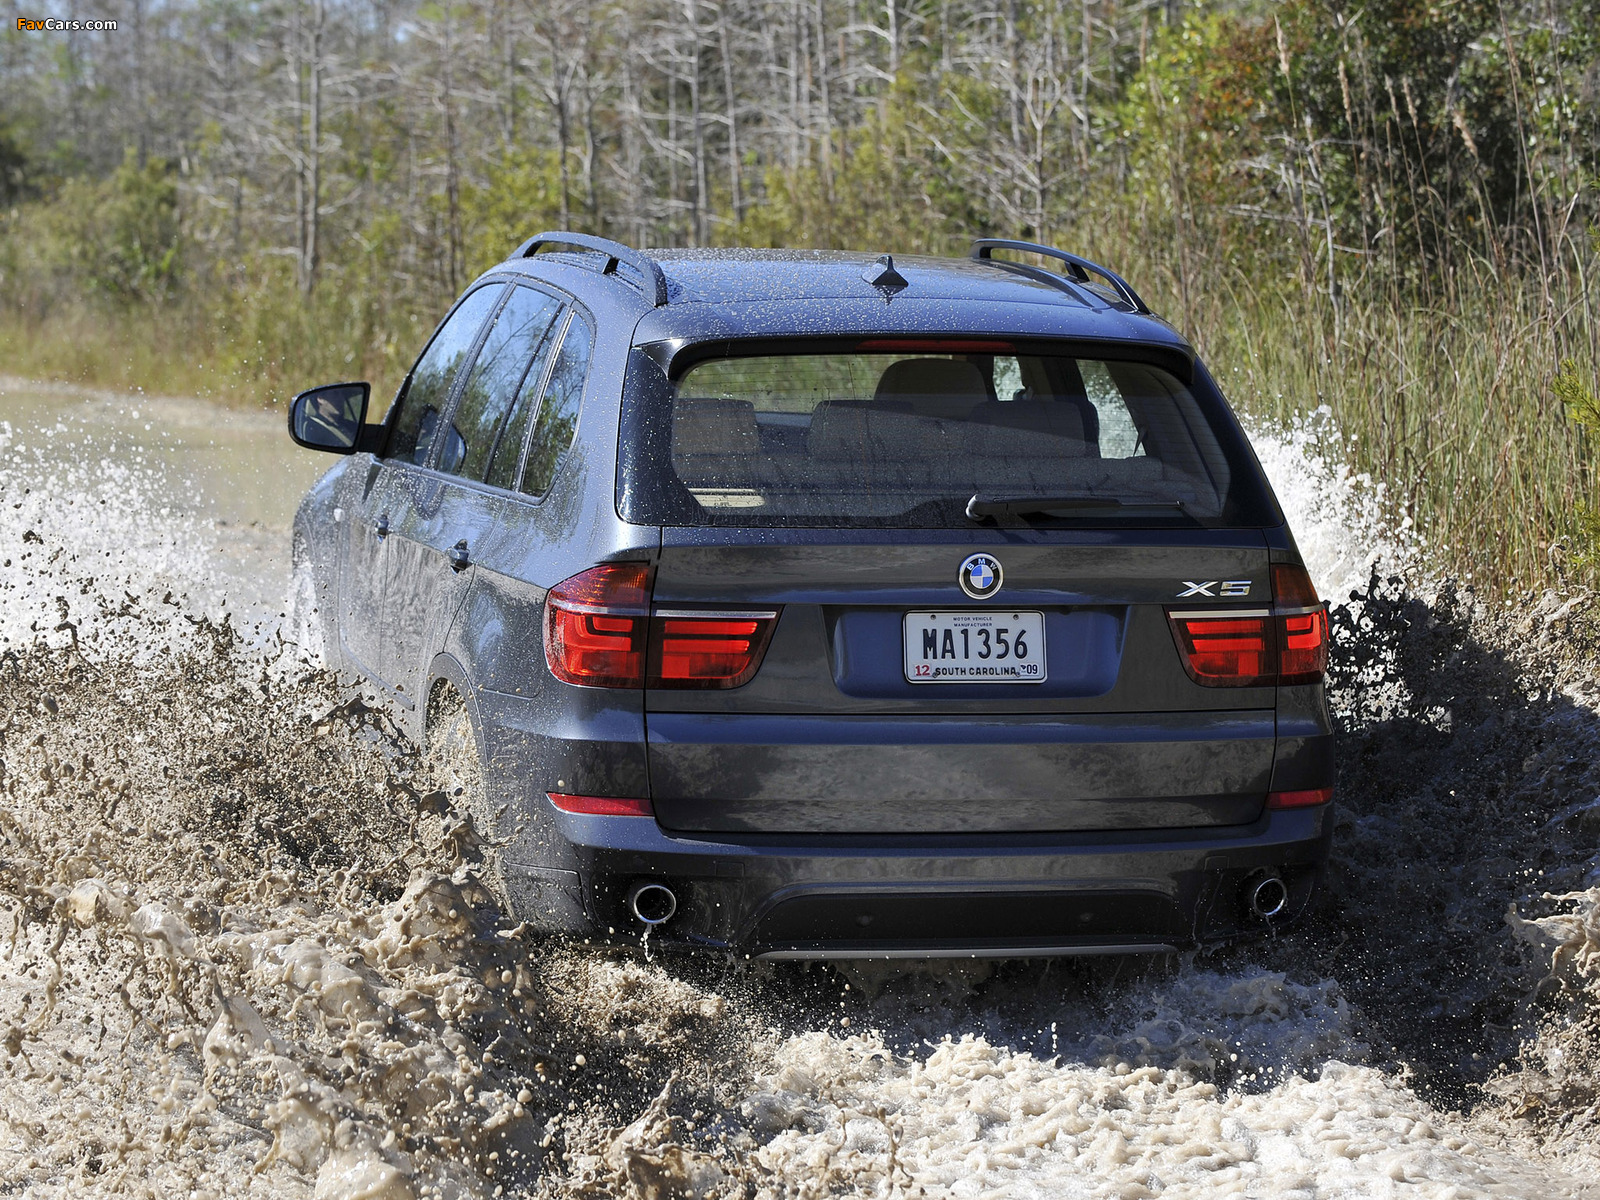 BMW X5 xDrive40d (E70) 2010 pictures (1600 x 1200)